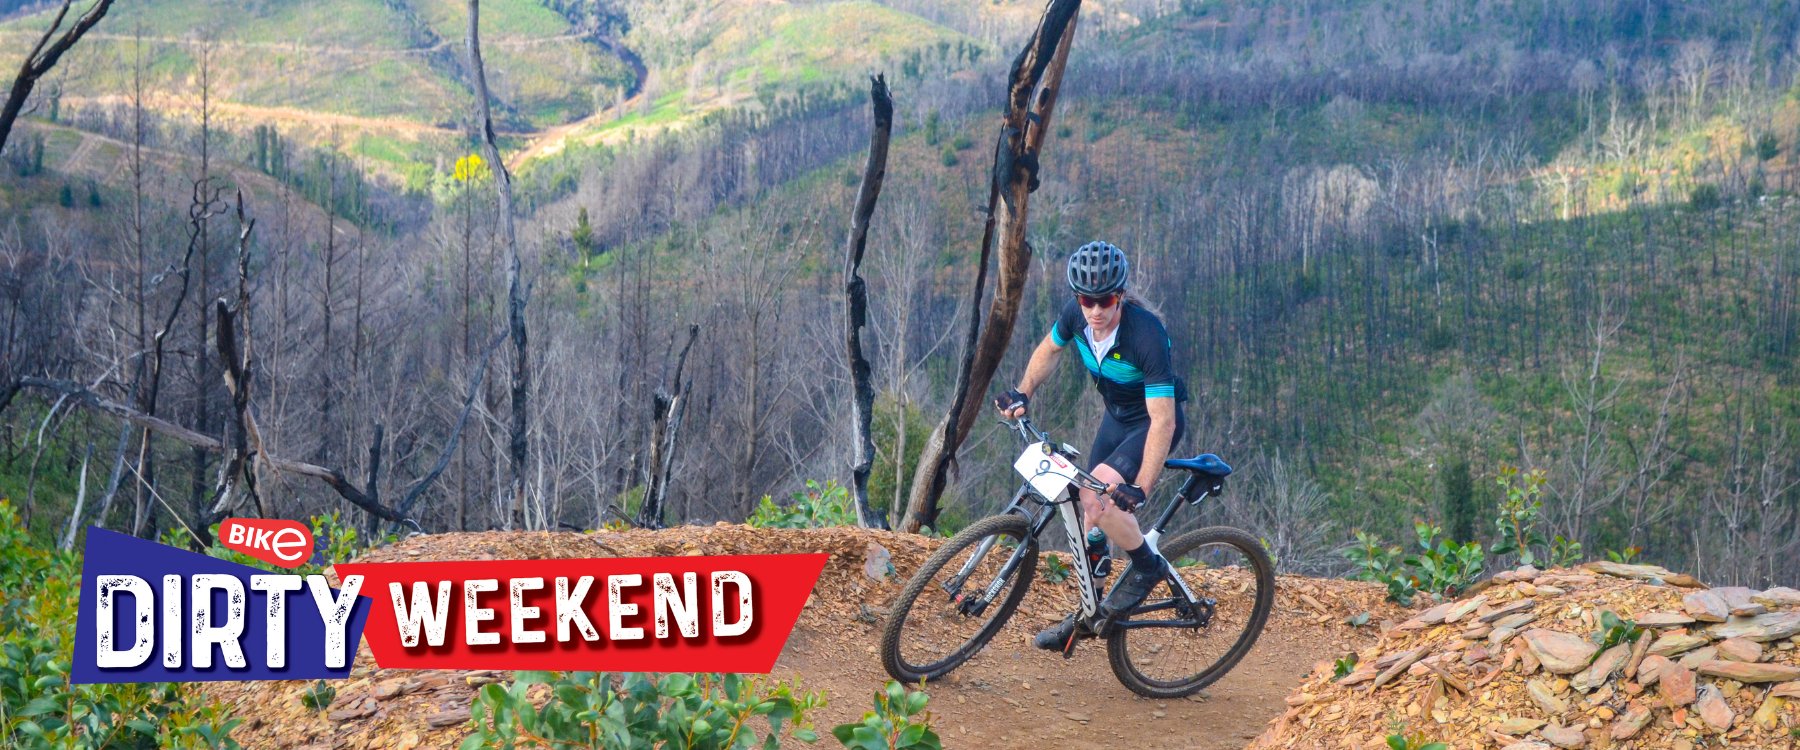 An image of someone mountain biking up a trail. Text in the bottom left corner reads BikE Dirty Weekend.